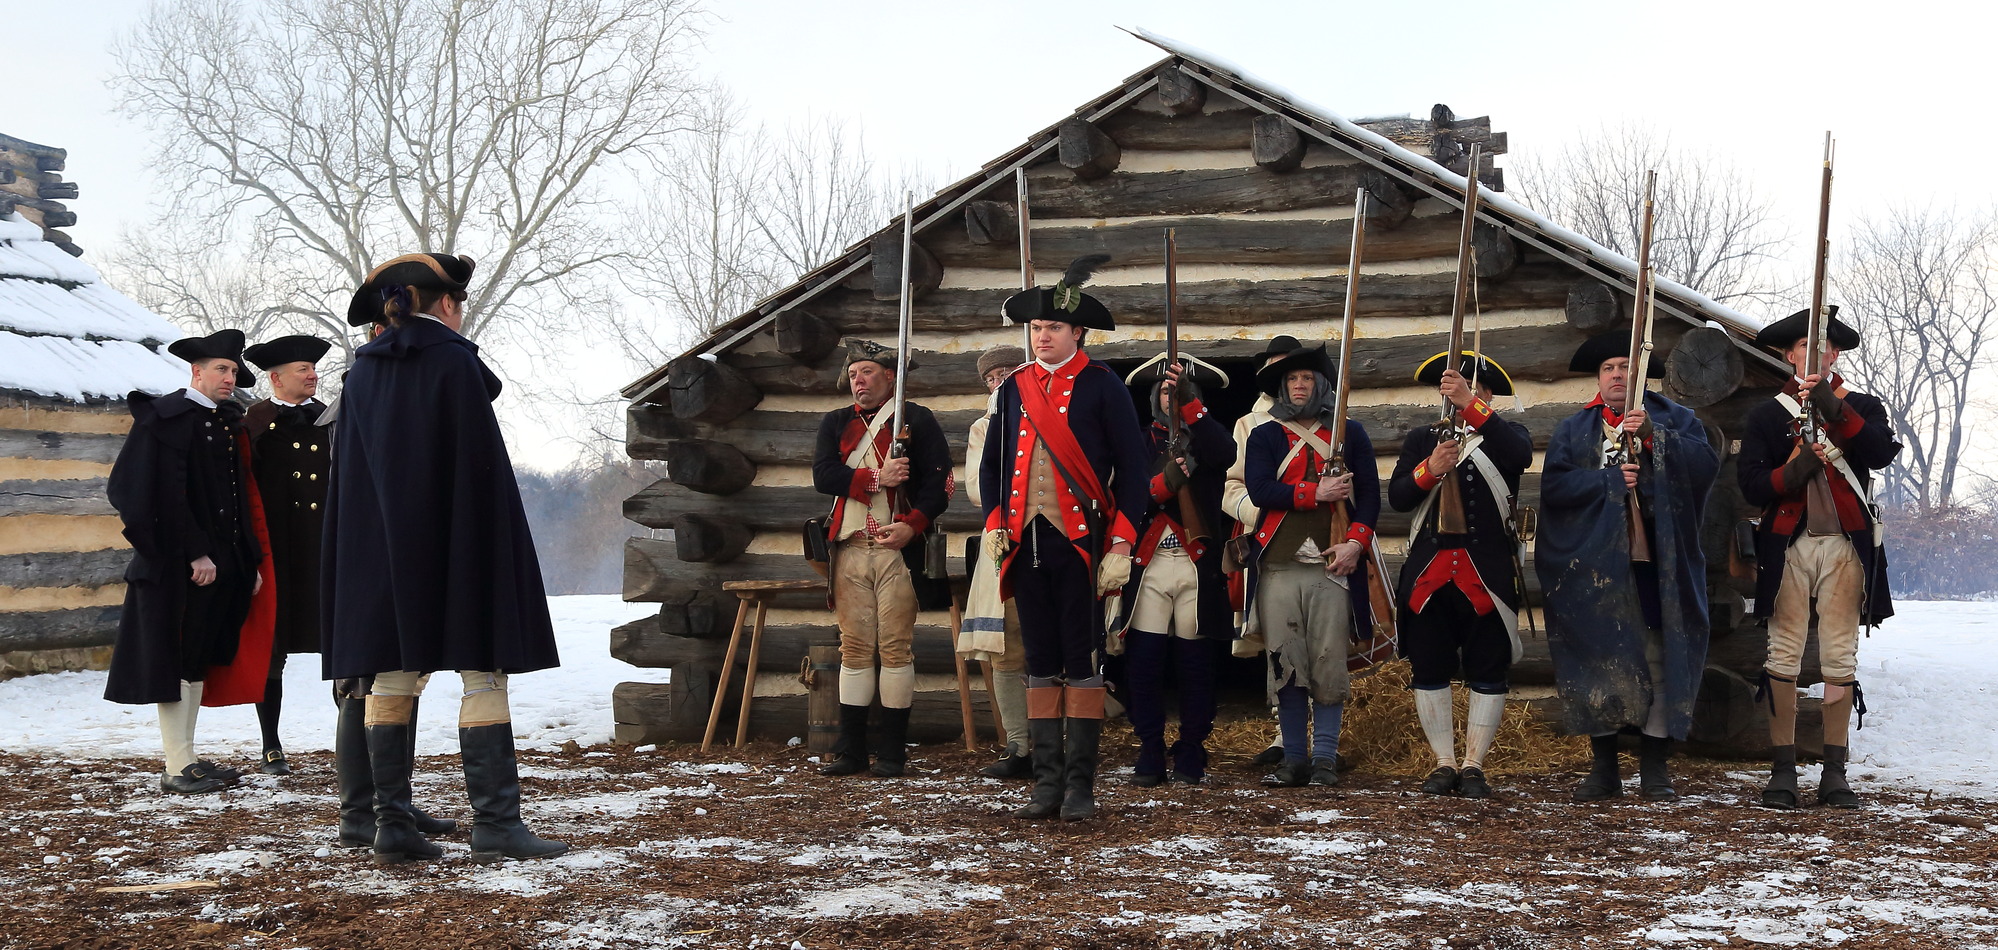 Twelve men wearing 18th century soldier uniforms stand in front of a log hut. Nine soldiers stand at attention holding muskets and three others stand in front, looking on.